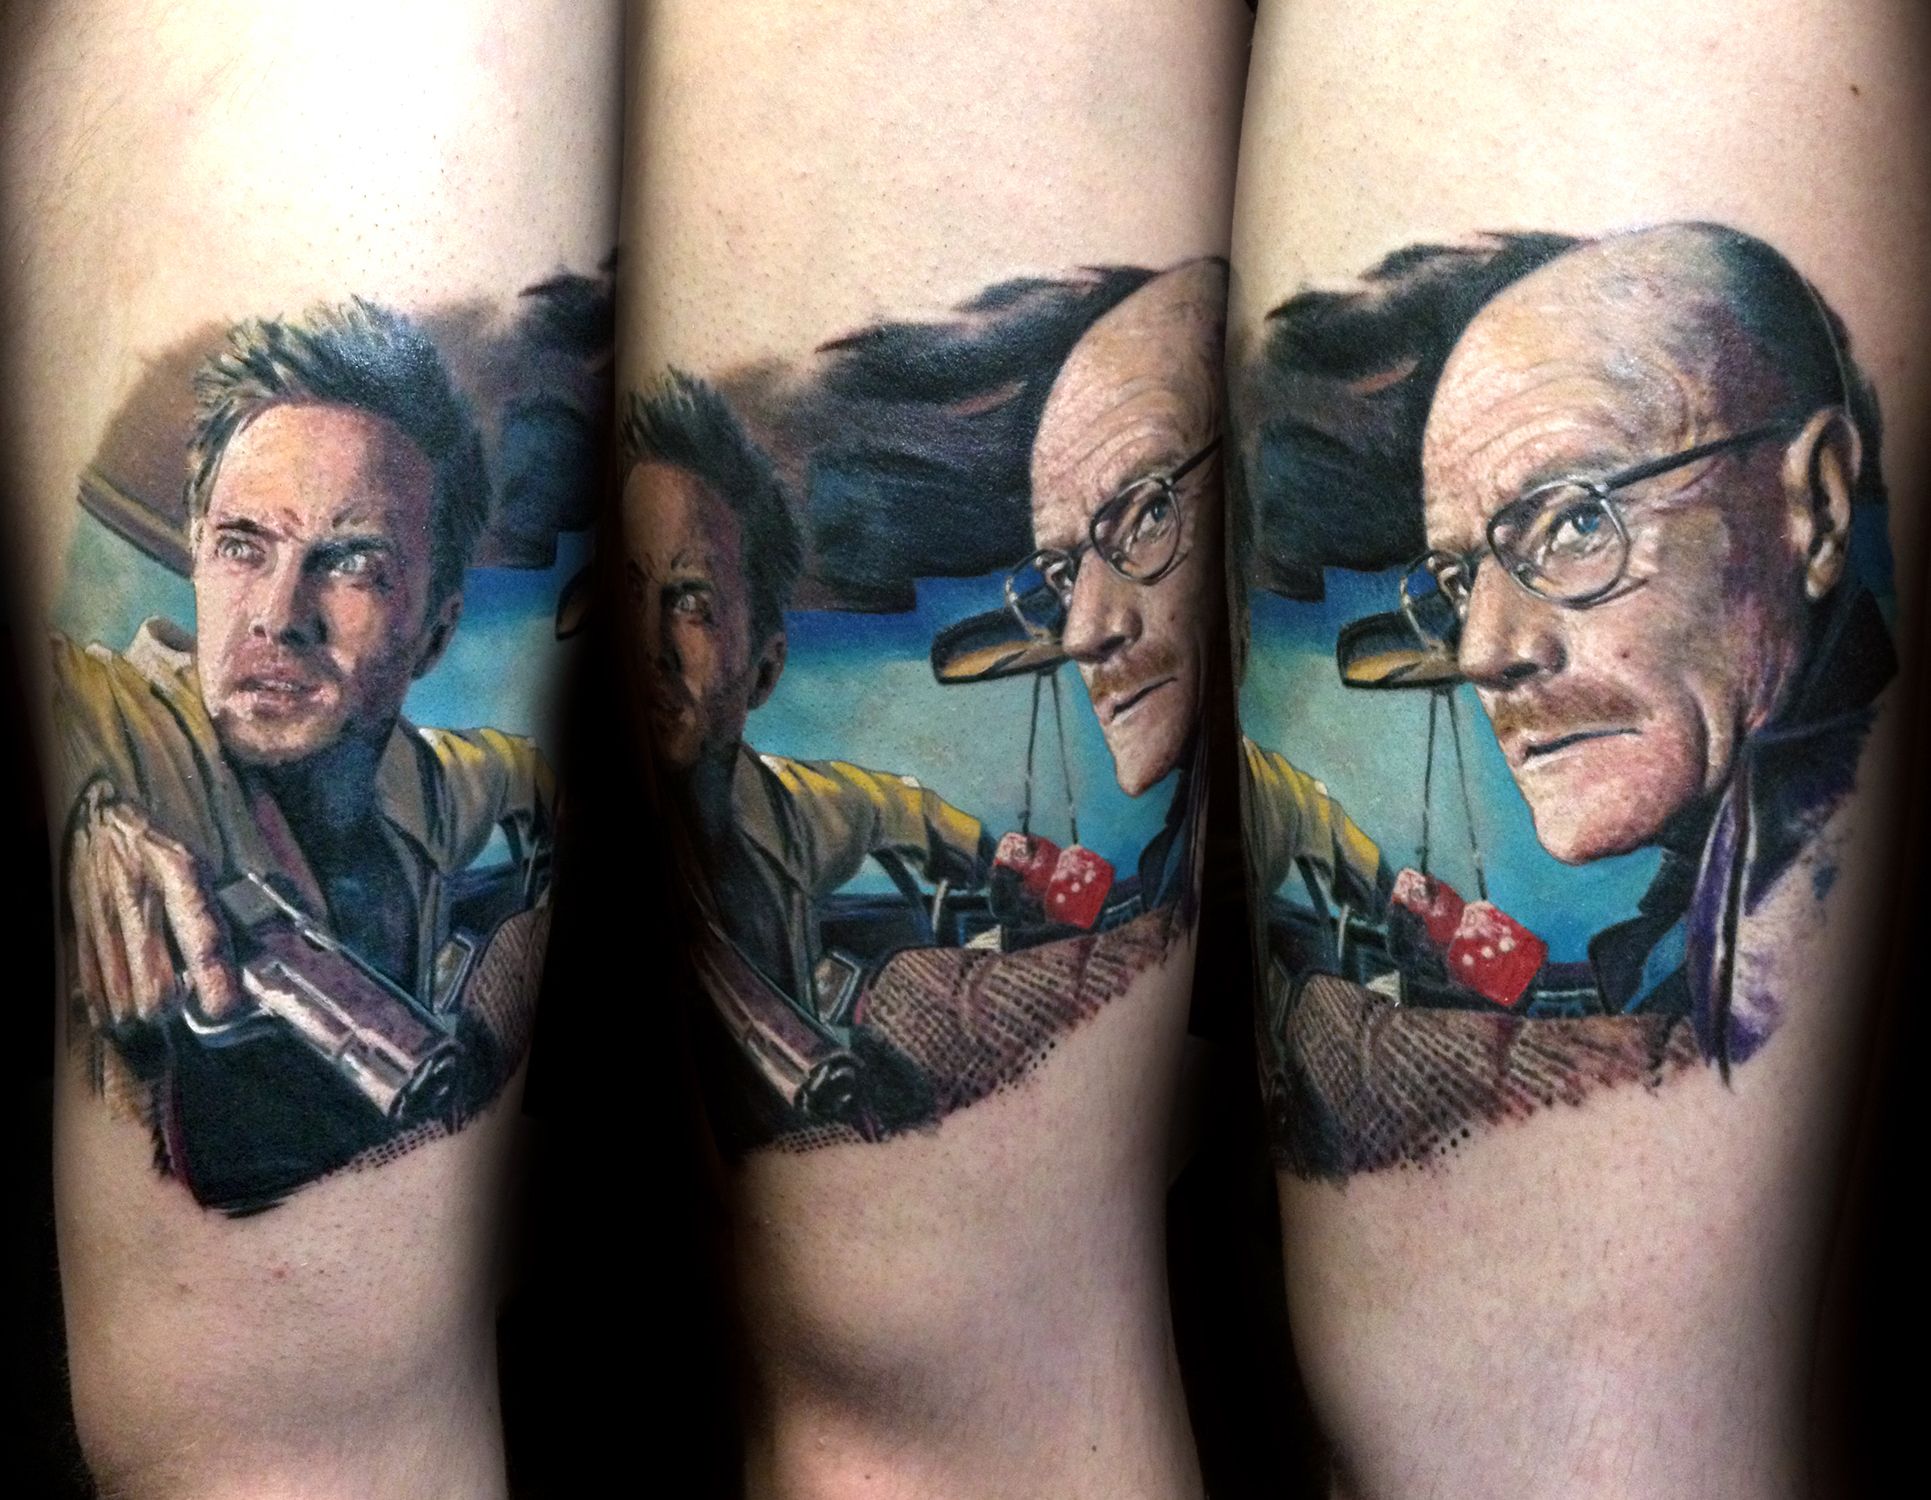 18 Bad Portrait Tattoos That Will Make You Rethink Your Next Ink - Indie88